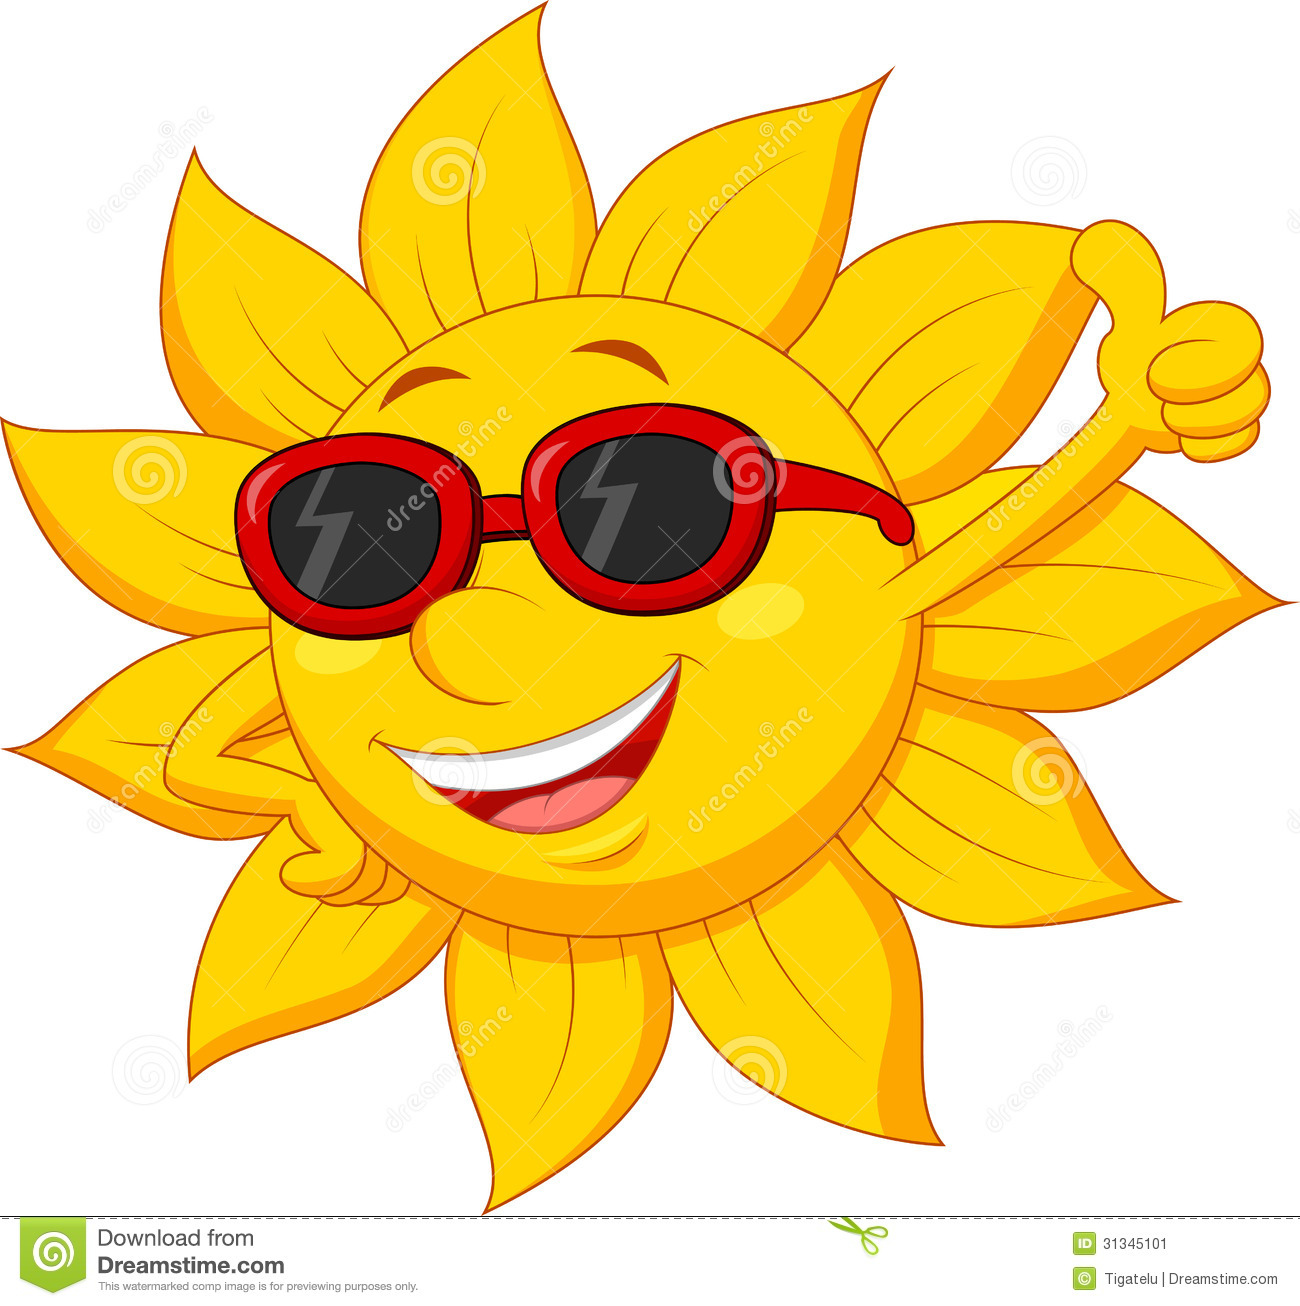 Sun With Sunglasses Thumbs Up   Clipart Panda   Free Clipart Images